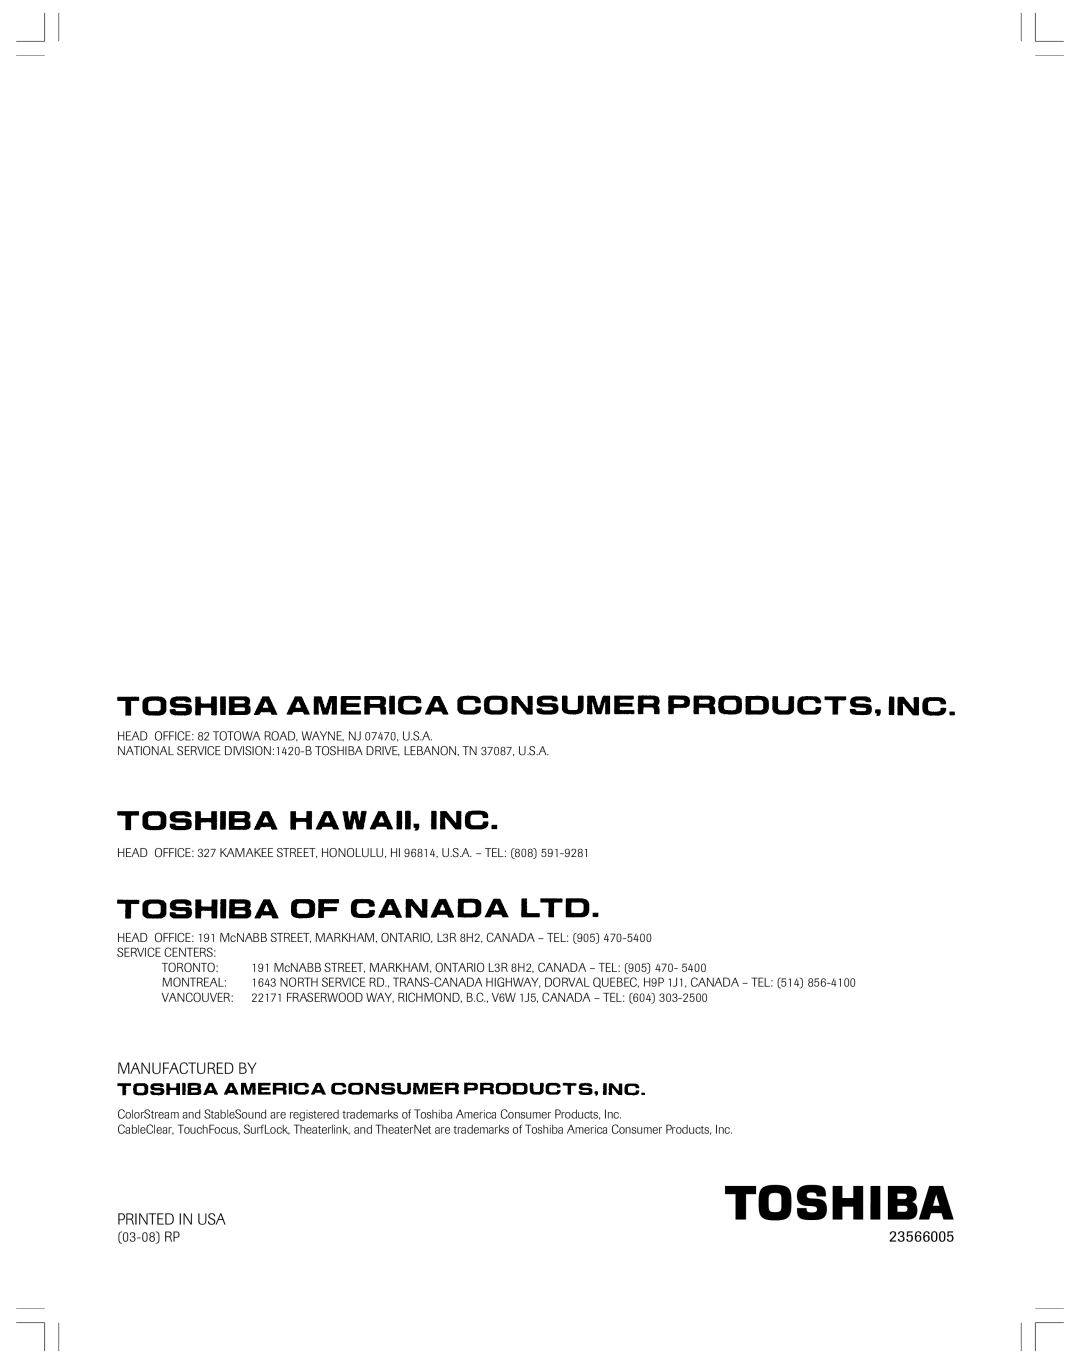 Toshiba 51HX93 owner manual Manufactured By, Printed In Usa, 23566005, 03-08 RP 